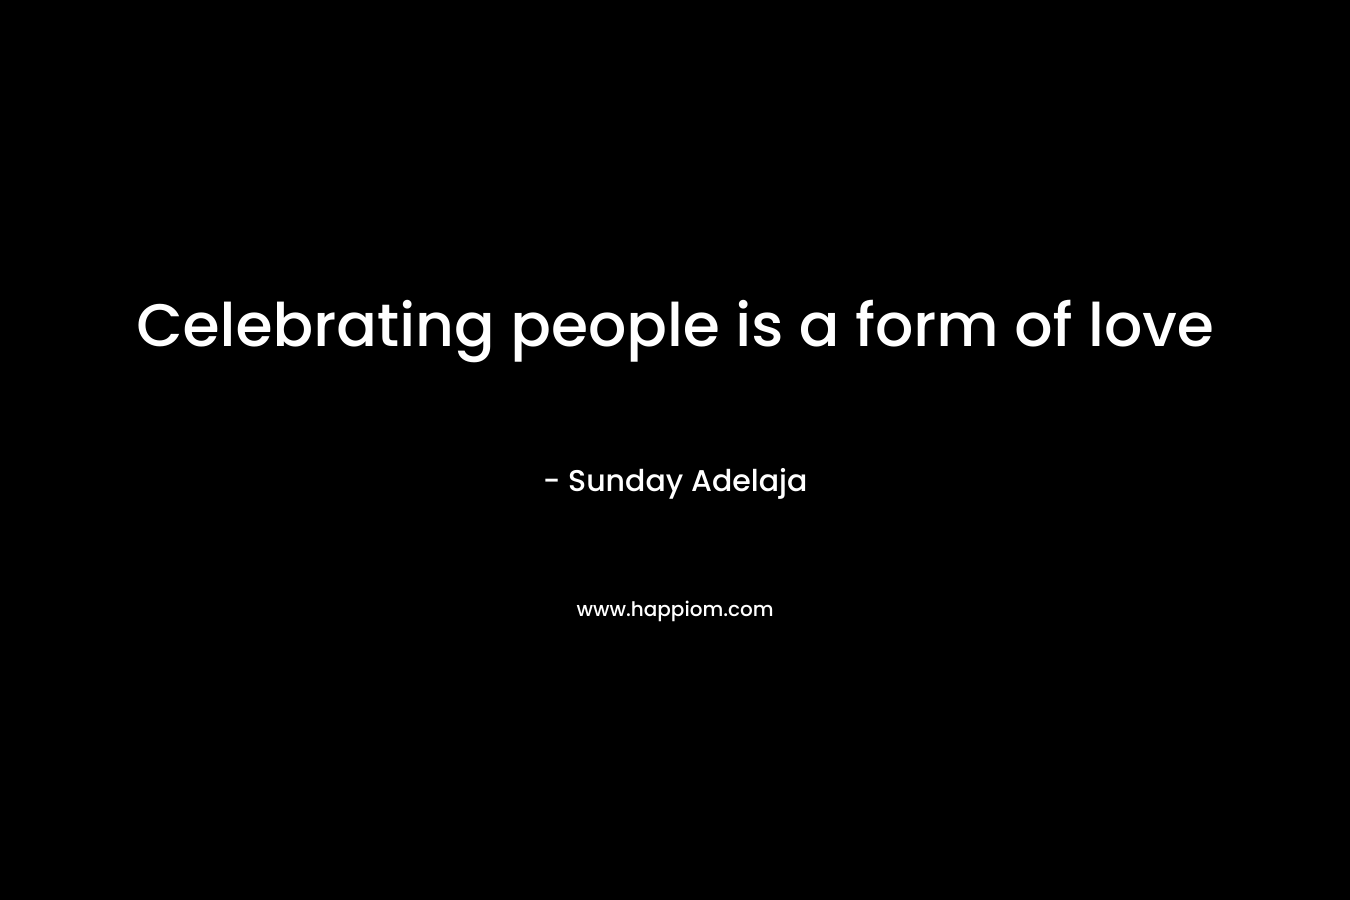 Celebrating people is a form of love